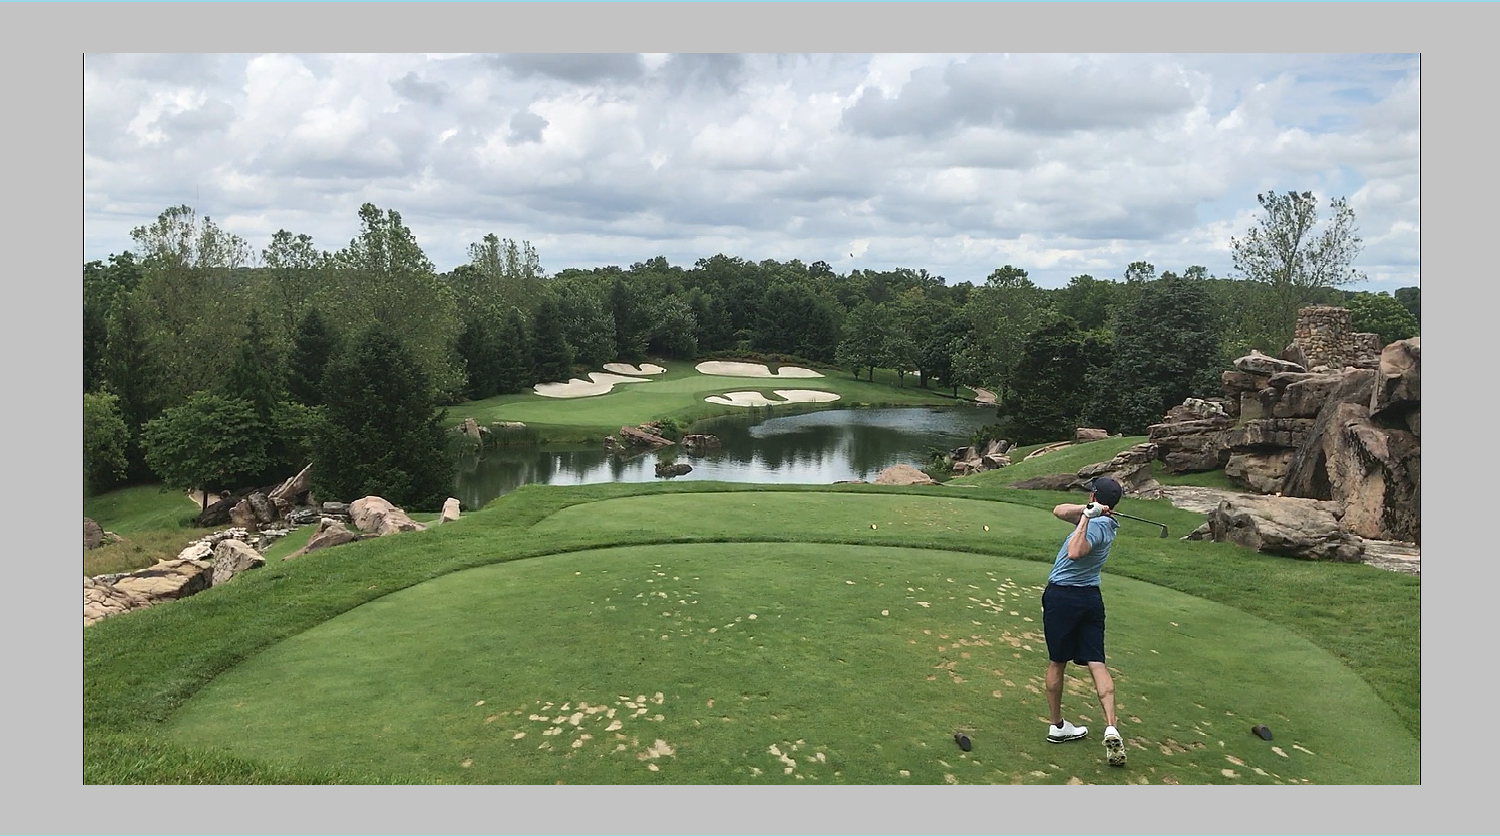 Tony Rosselli Playing Golf - Faculty Feature: Meet Tony Rosselli - Parks, Recreation and Tourism Management at NC State University